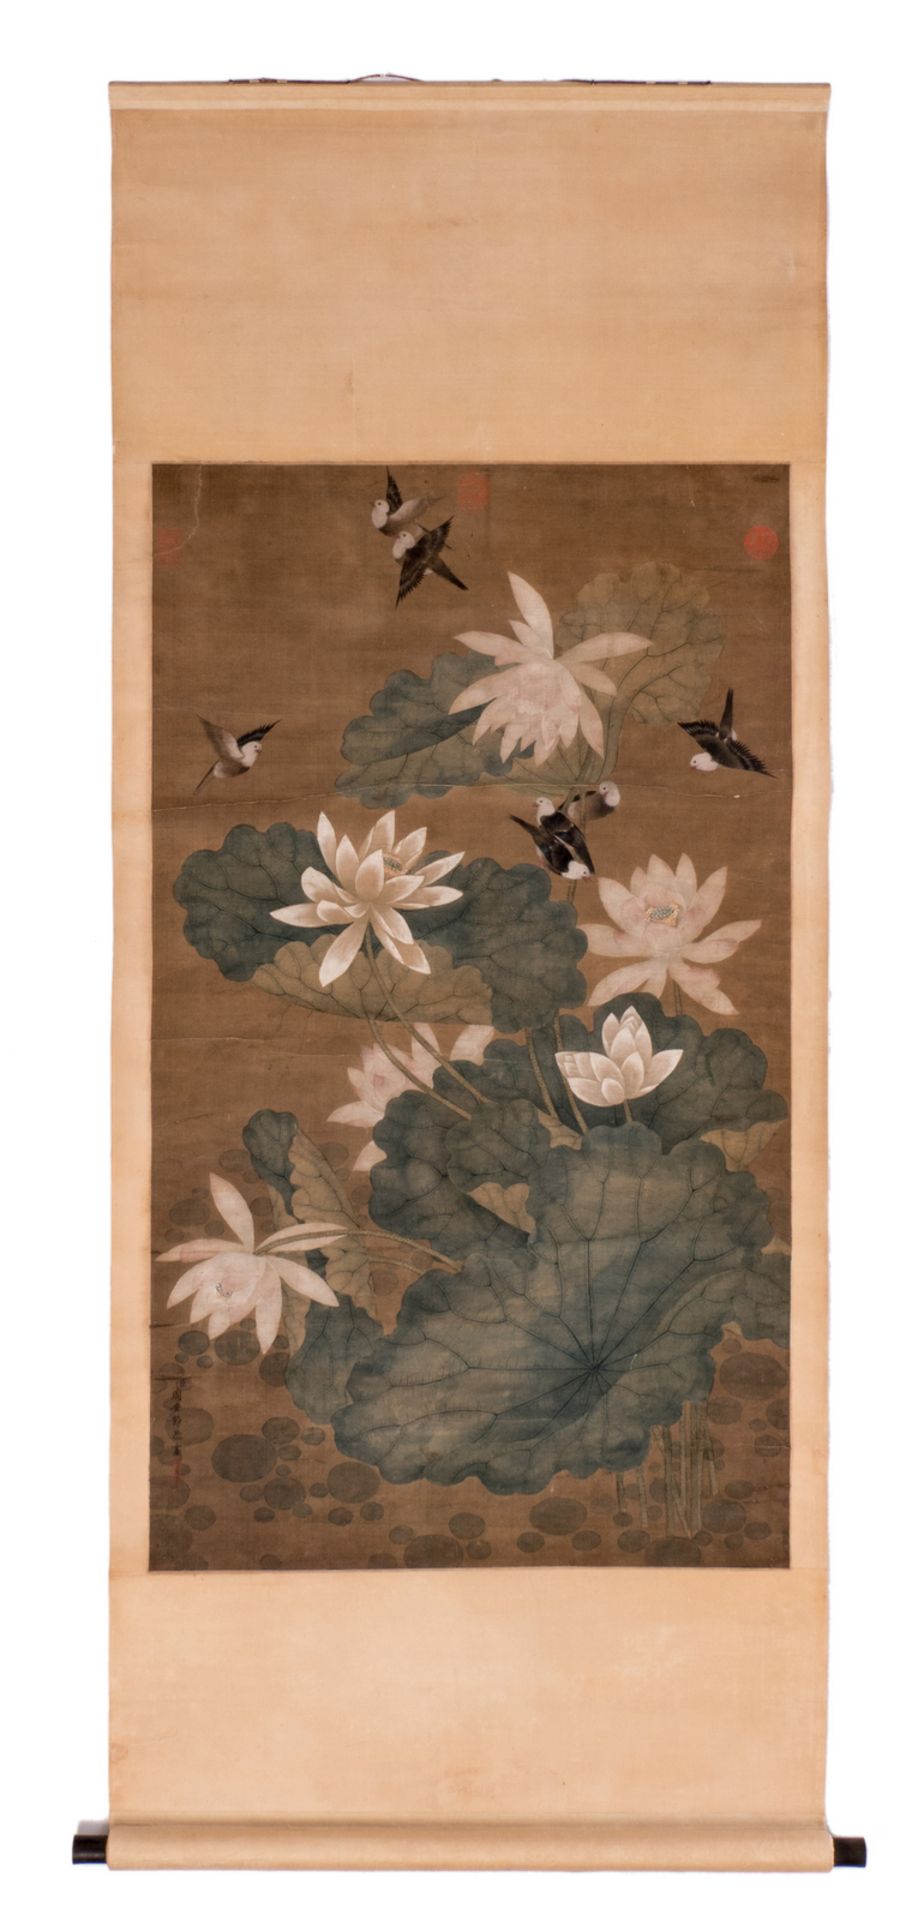 A Chinese scroll, watercolour on textile, depicting birds and water lilies, signed, 18thC, 61 x